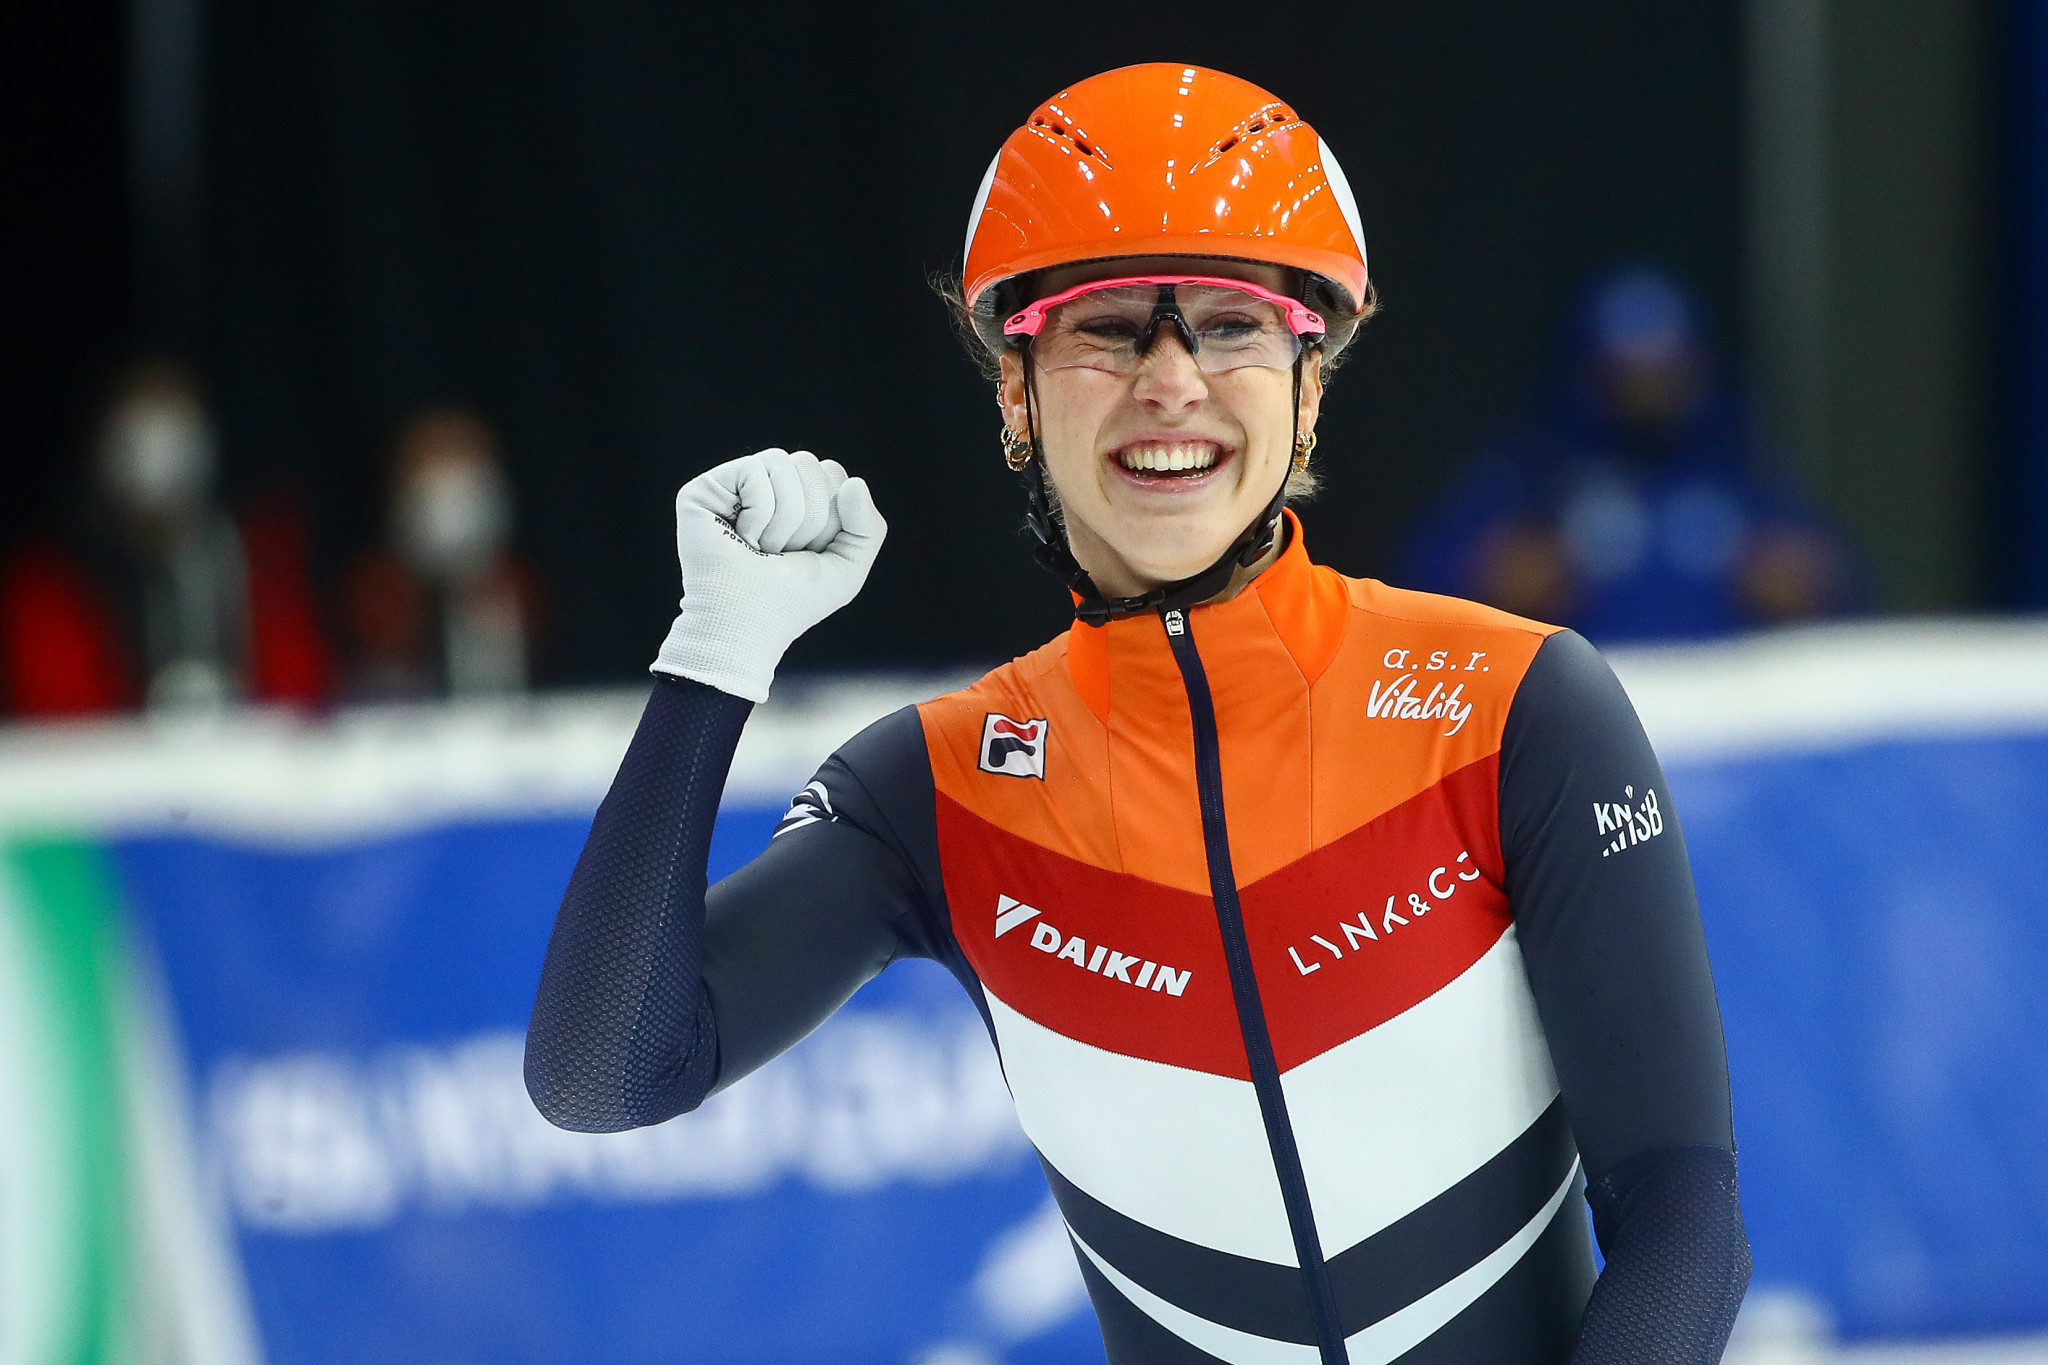 Stellar Schulting wins 500m and 1,500m at Short Track World Cup in Debrecen